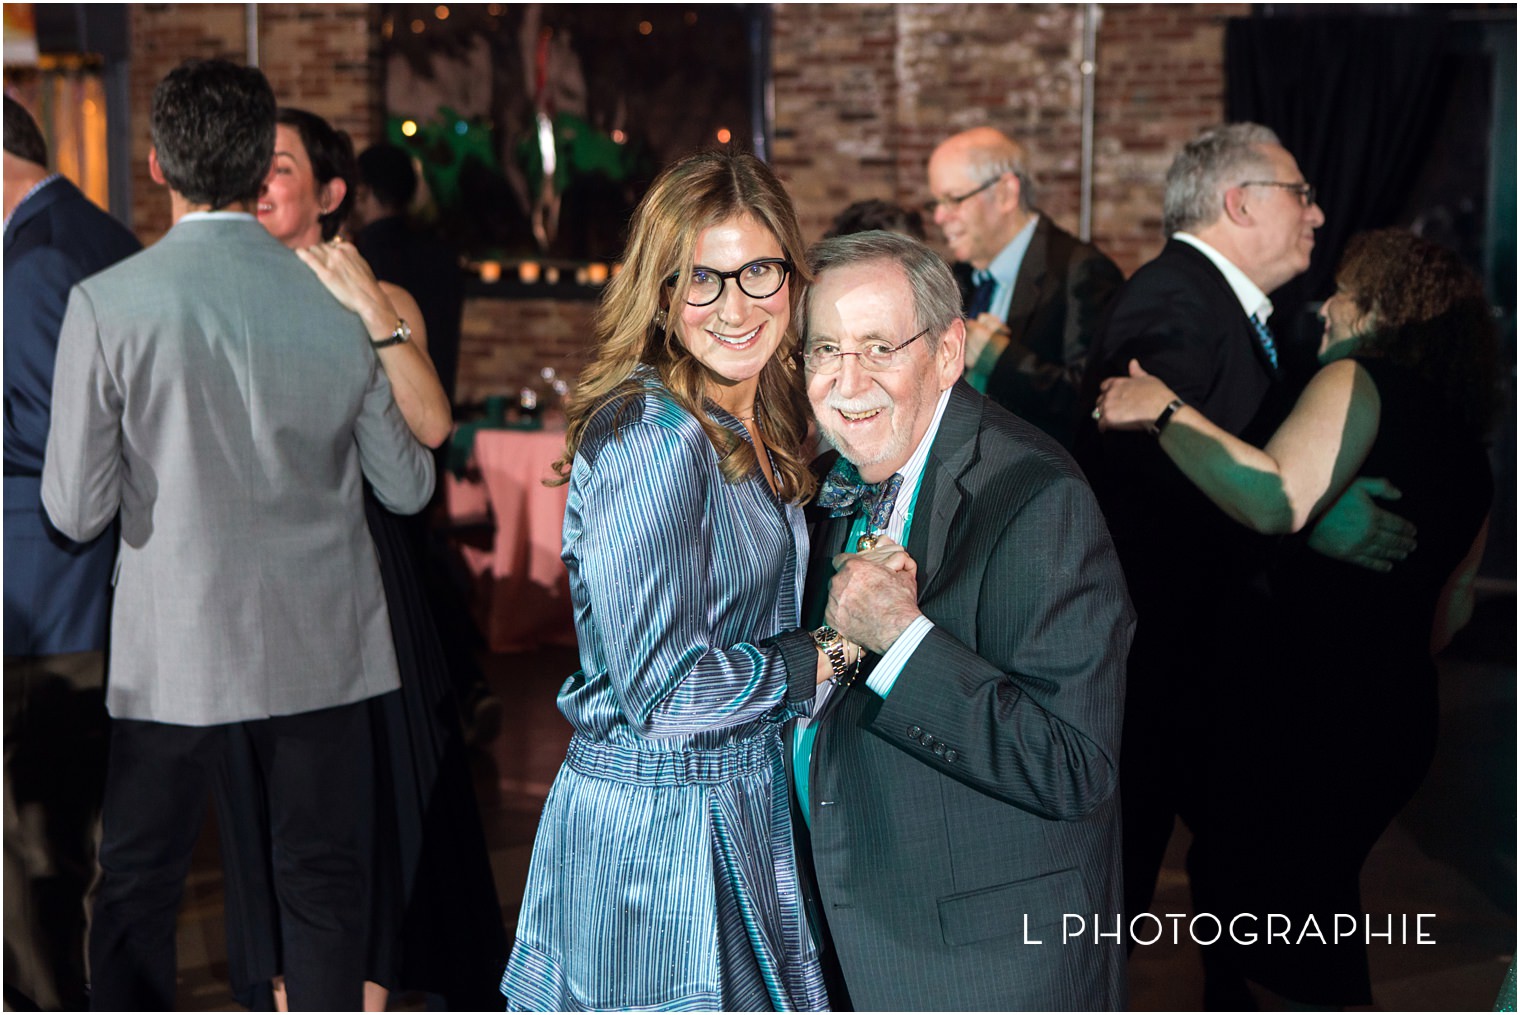 Central Reform Congregation,Ivy,Jewish,Jewish tradition,L Photographie,L Photographie mitzvahs,Meredith Marquardt,St. Louis mitzvah photography,Third Degree Glass Factory,bat mitzvah,best St. Louis mitzvah photographer,bohemian,greenery,pink and green,pink and ivy theme,